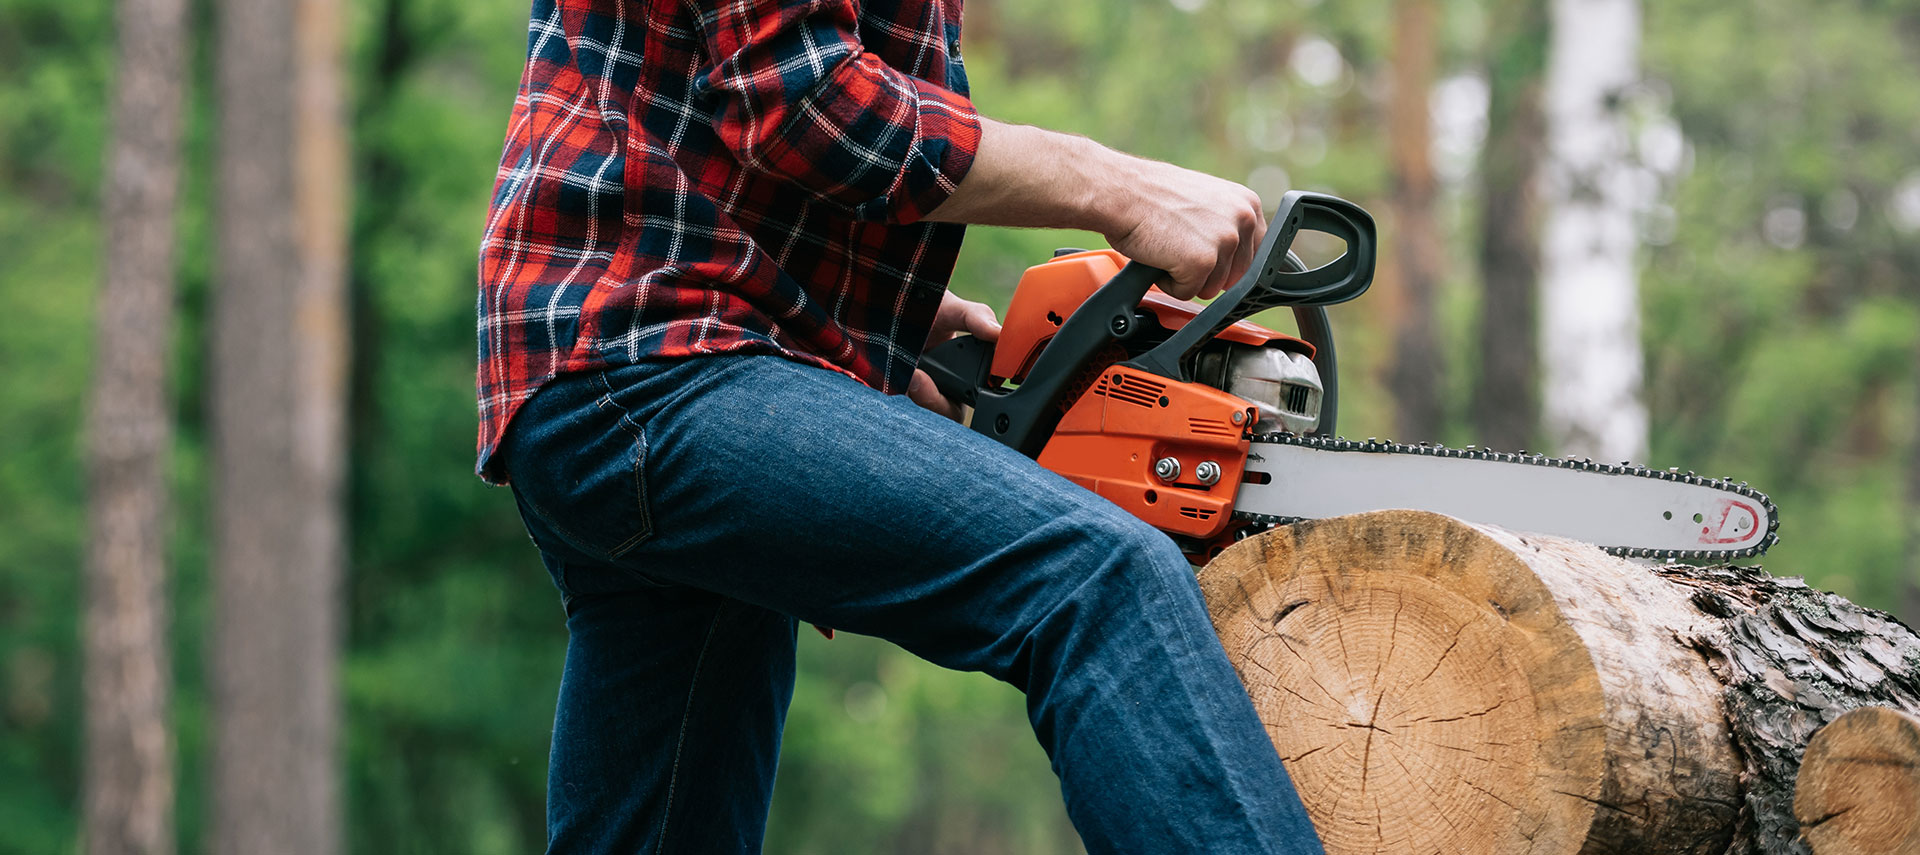 Our Sale Creek professional tree service ensures quick, efficient, and safe work.